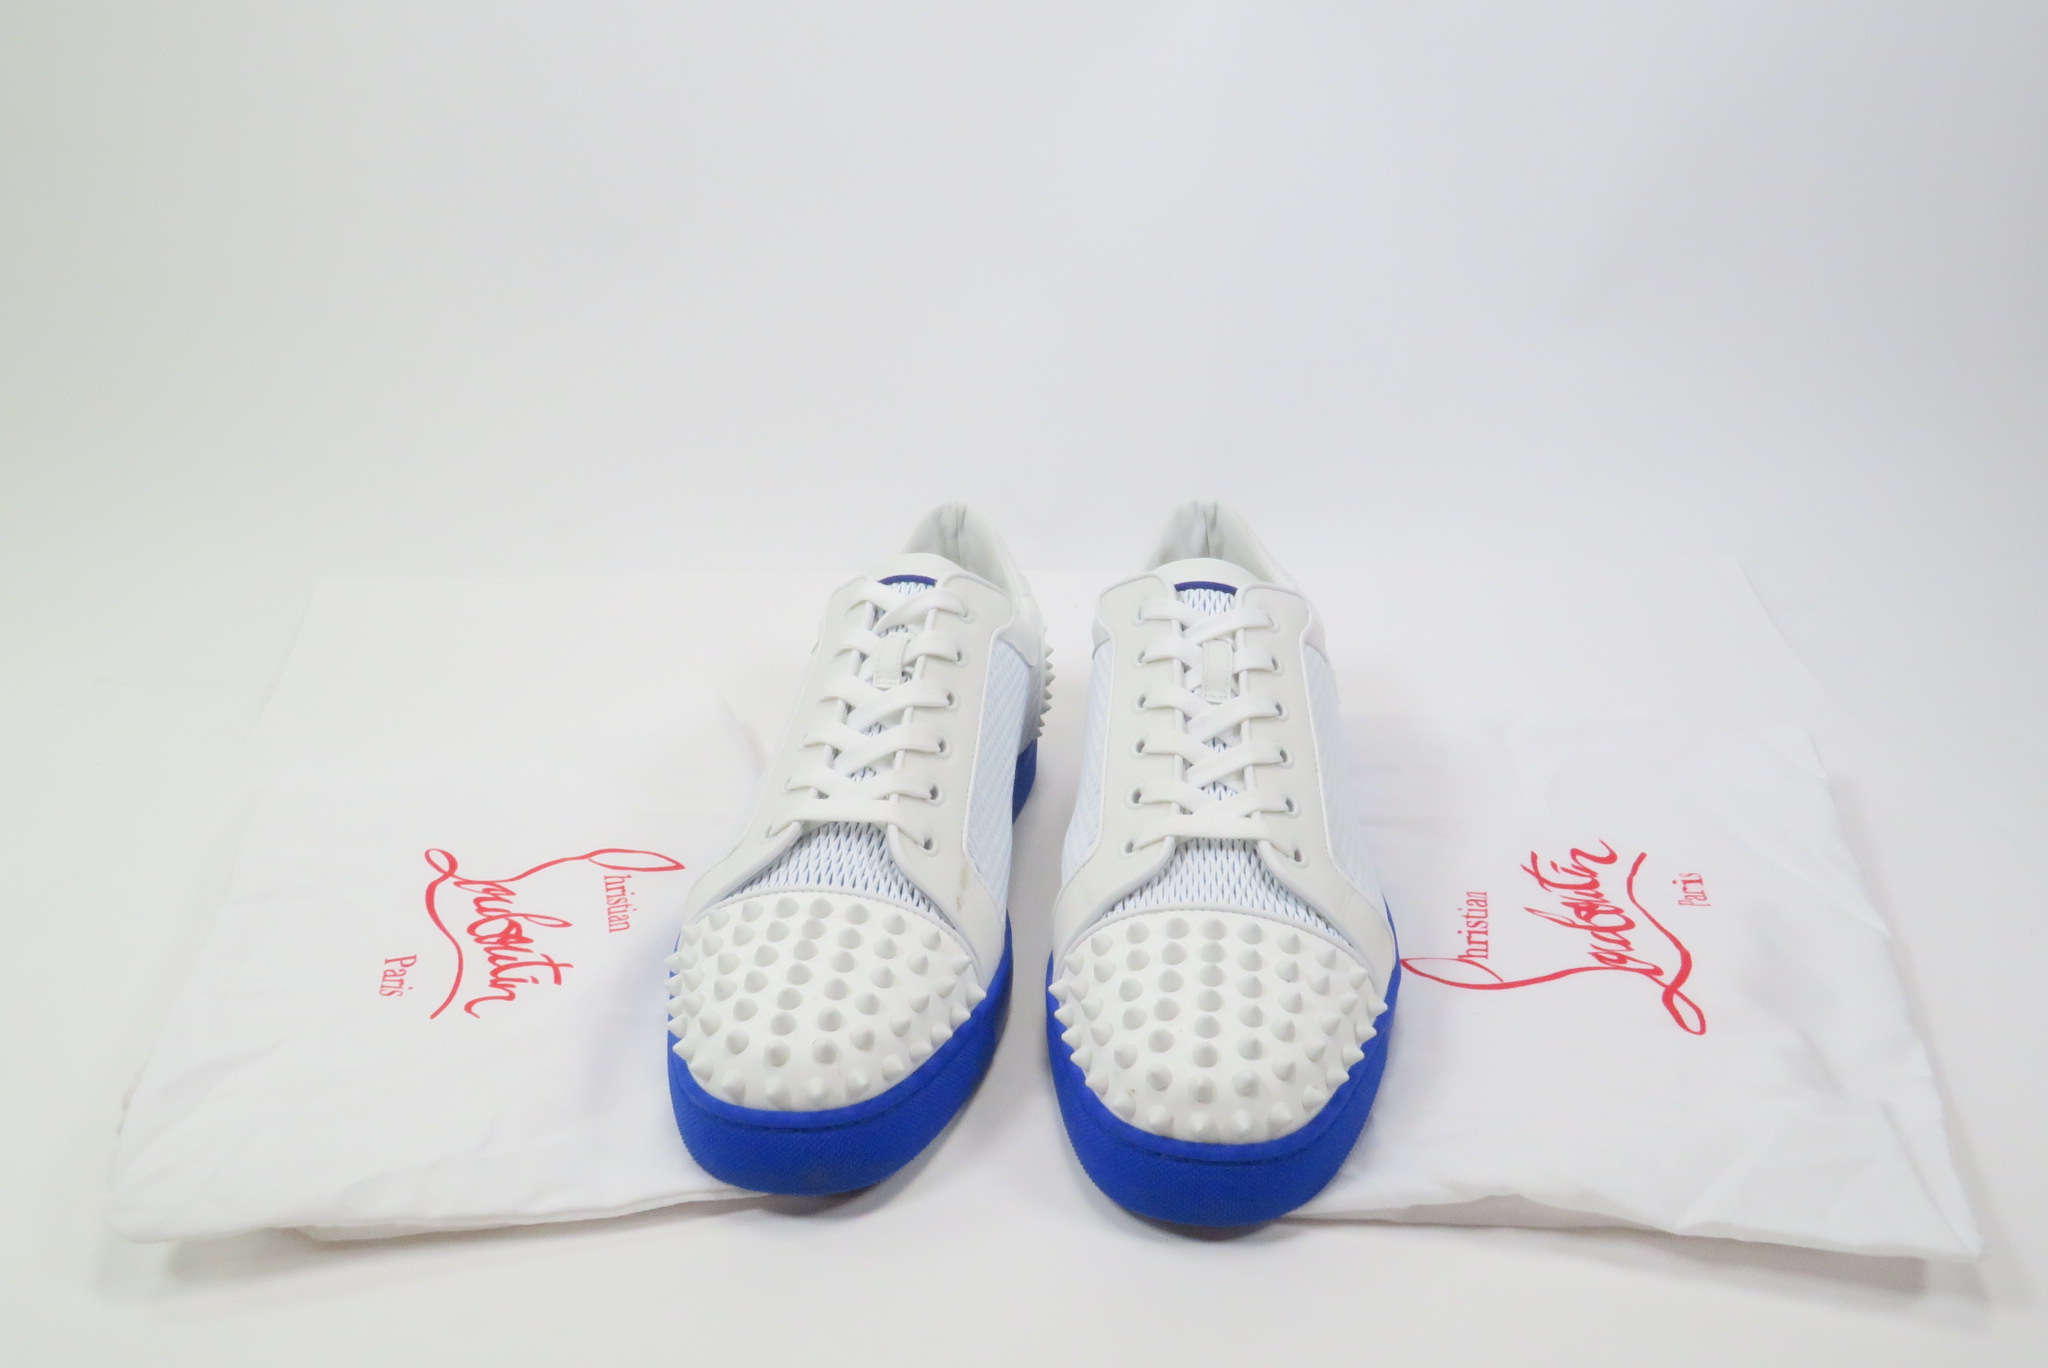 Christian Louboutin Men's Seavaste 2 Low-Top Leather Spike Sneakers